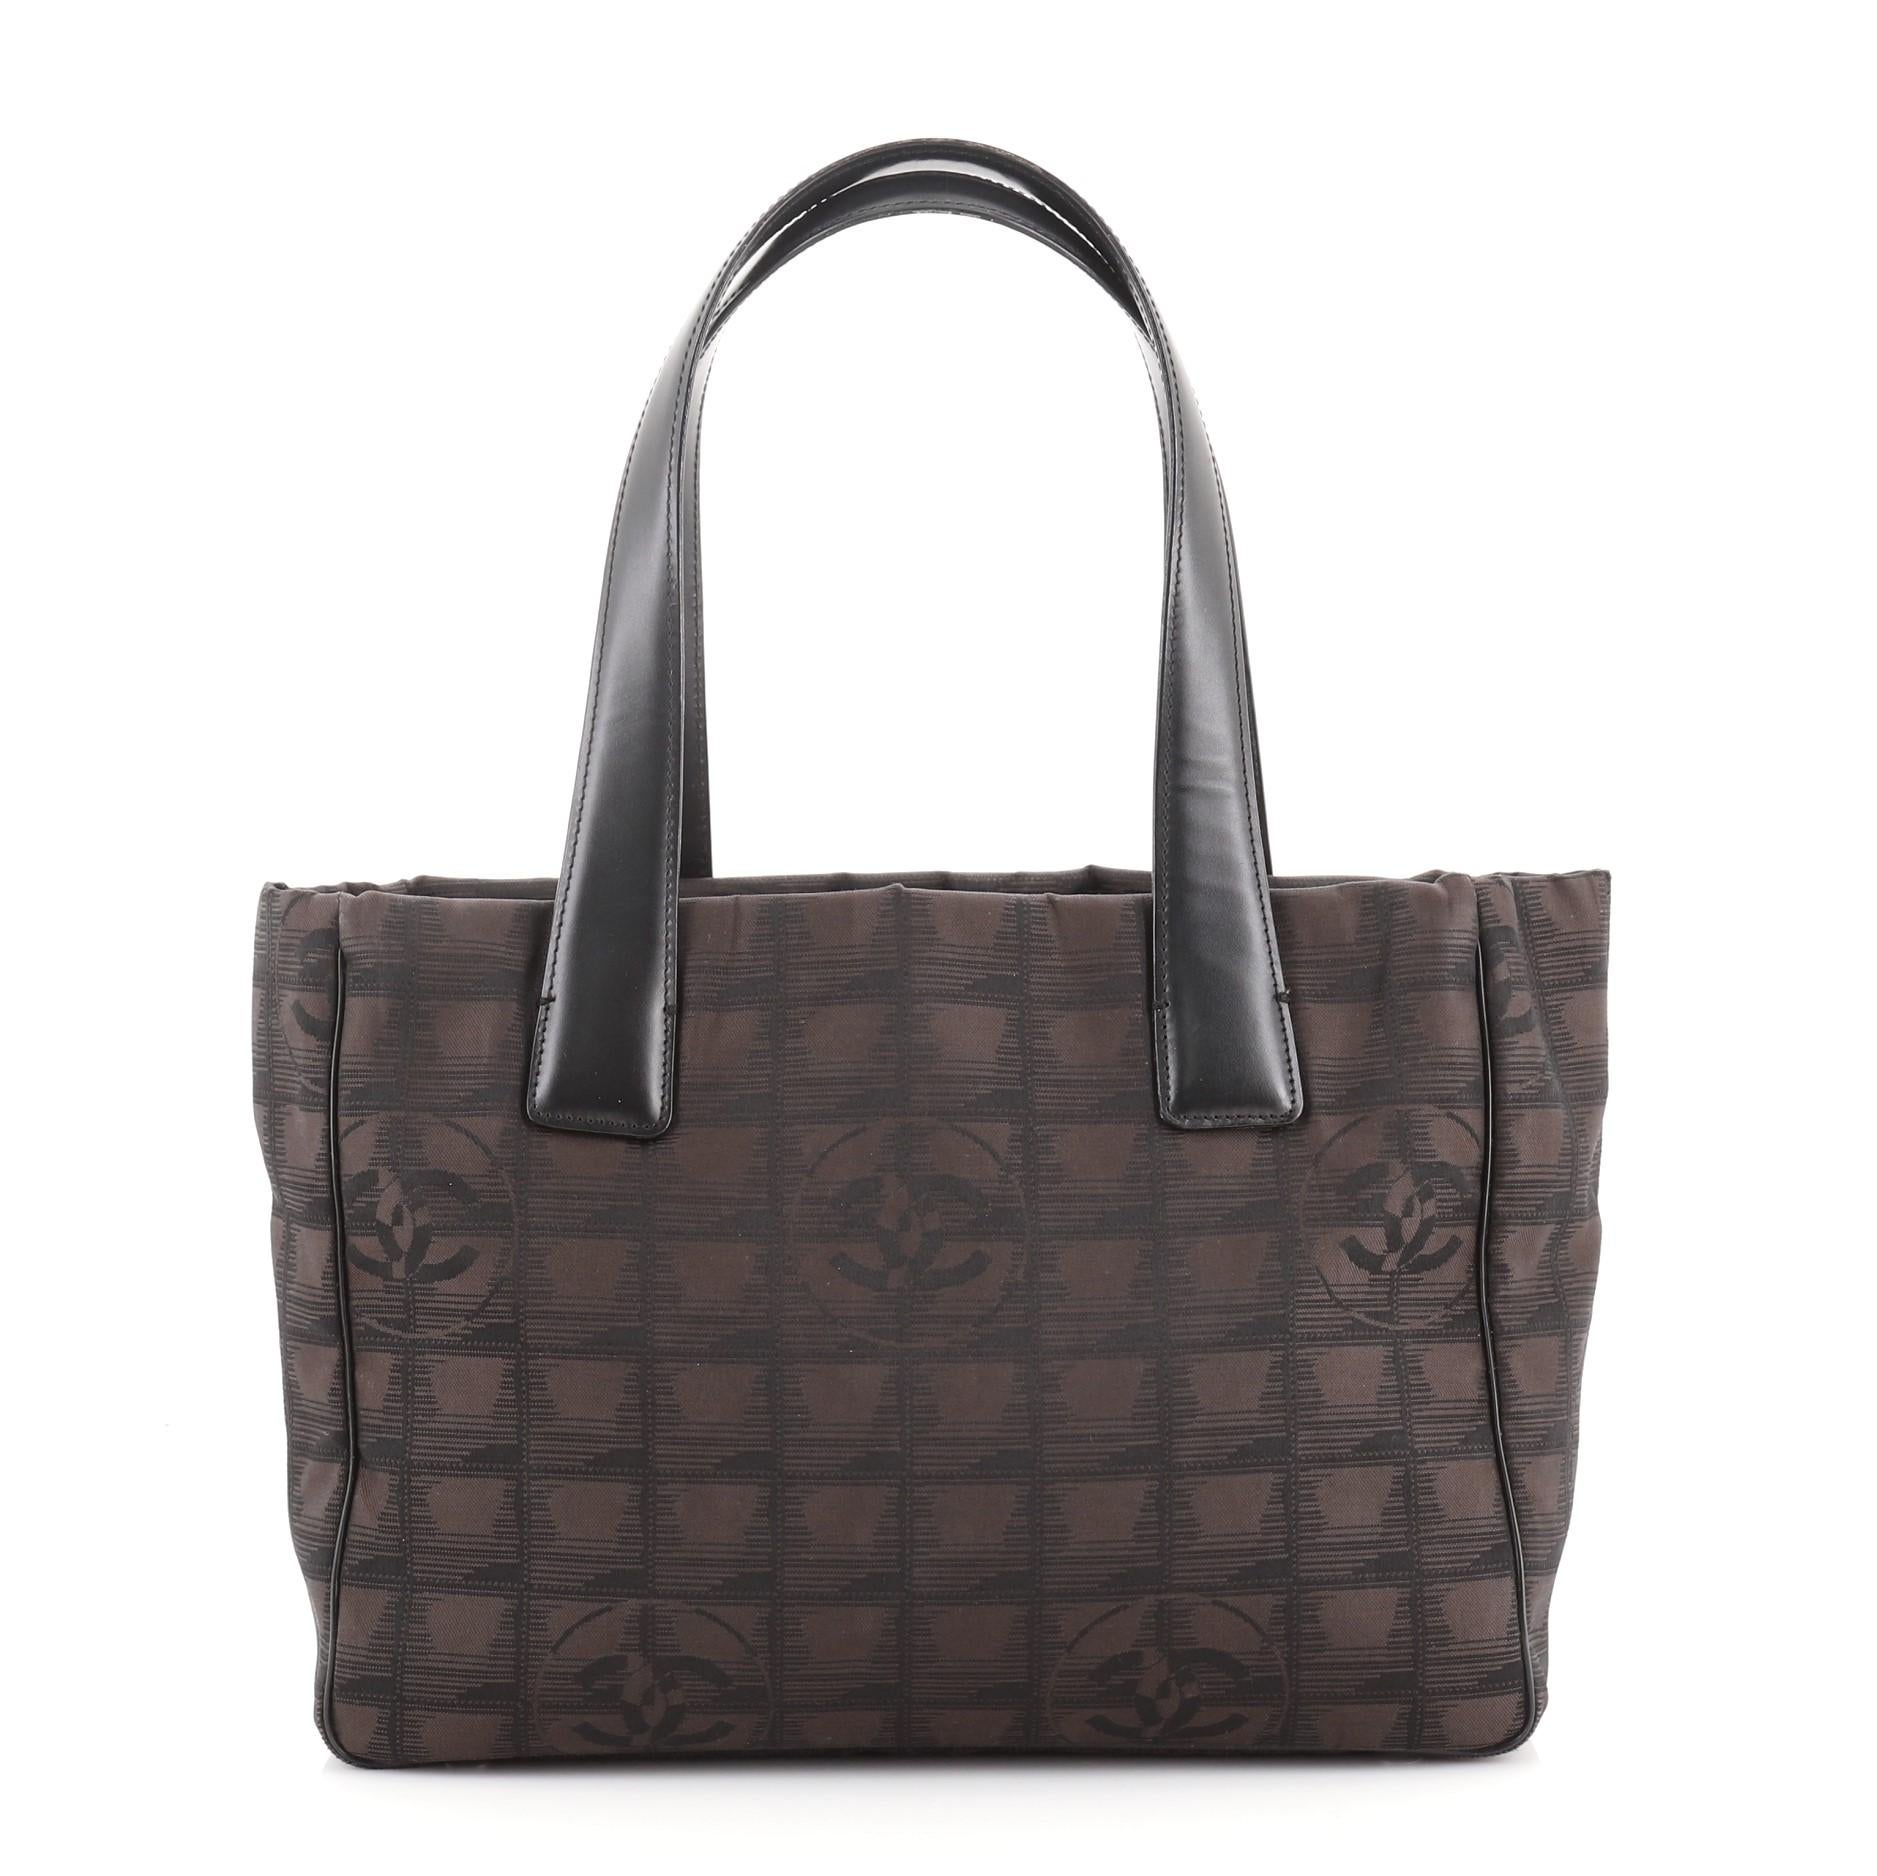 Chanel Travel Line Tote Nylon Small
Black Brown Nylon

Condition Details: Moderate wear and discoloration on exterior corners, creasing near base, splitting and peeling on handle wax edges. Small stains in interior, scratches on